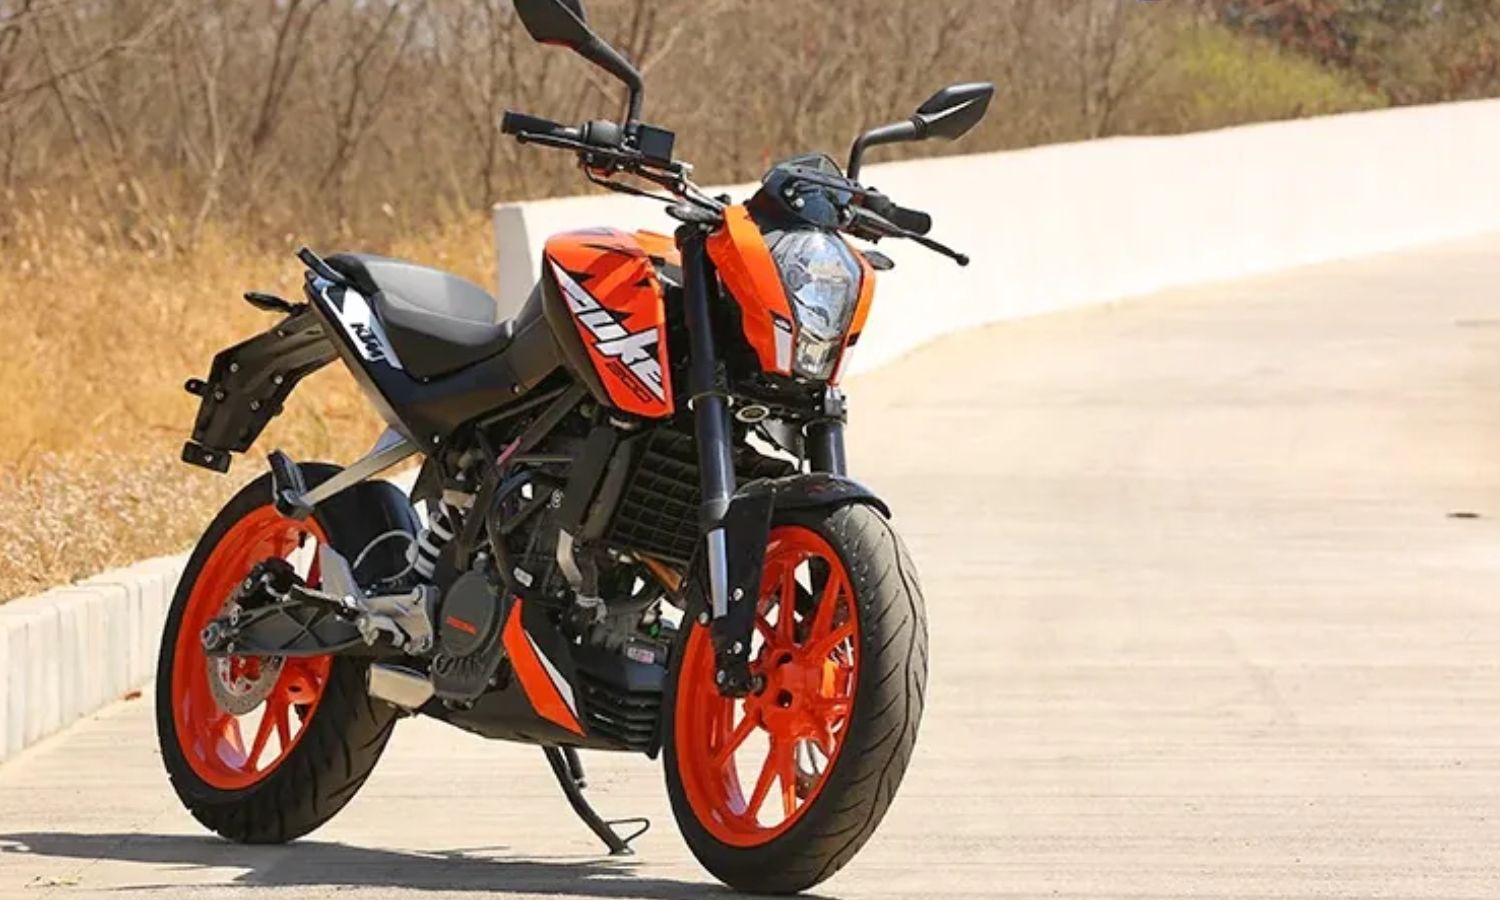 1 Millionth KTM Motorcycle Rolls Out Of Bajaj's Chakan Plant